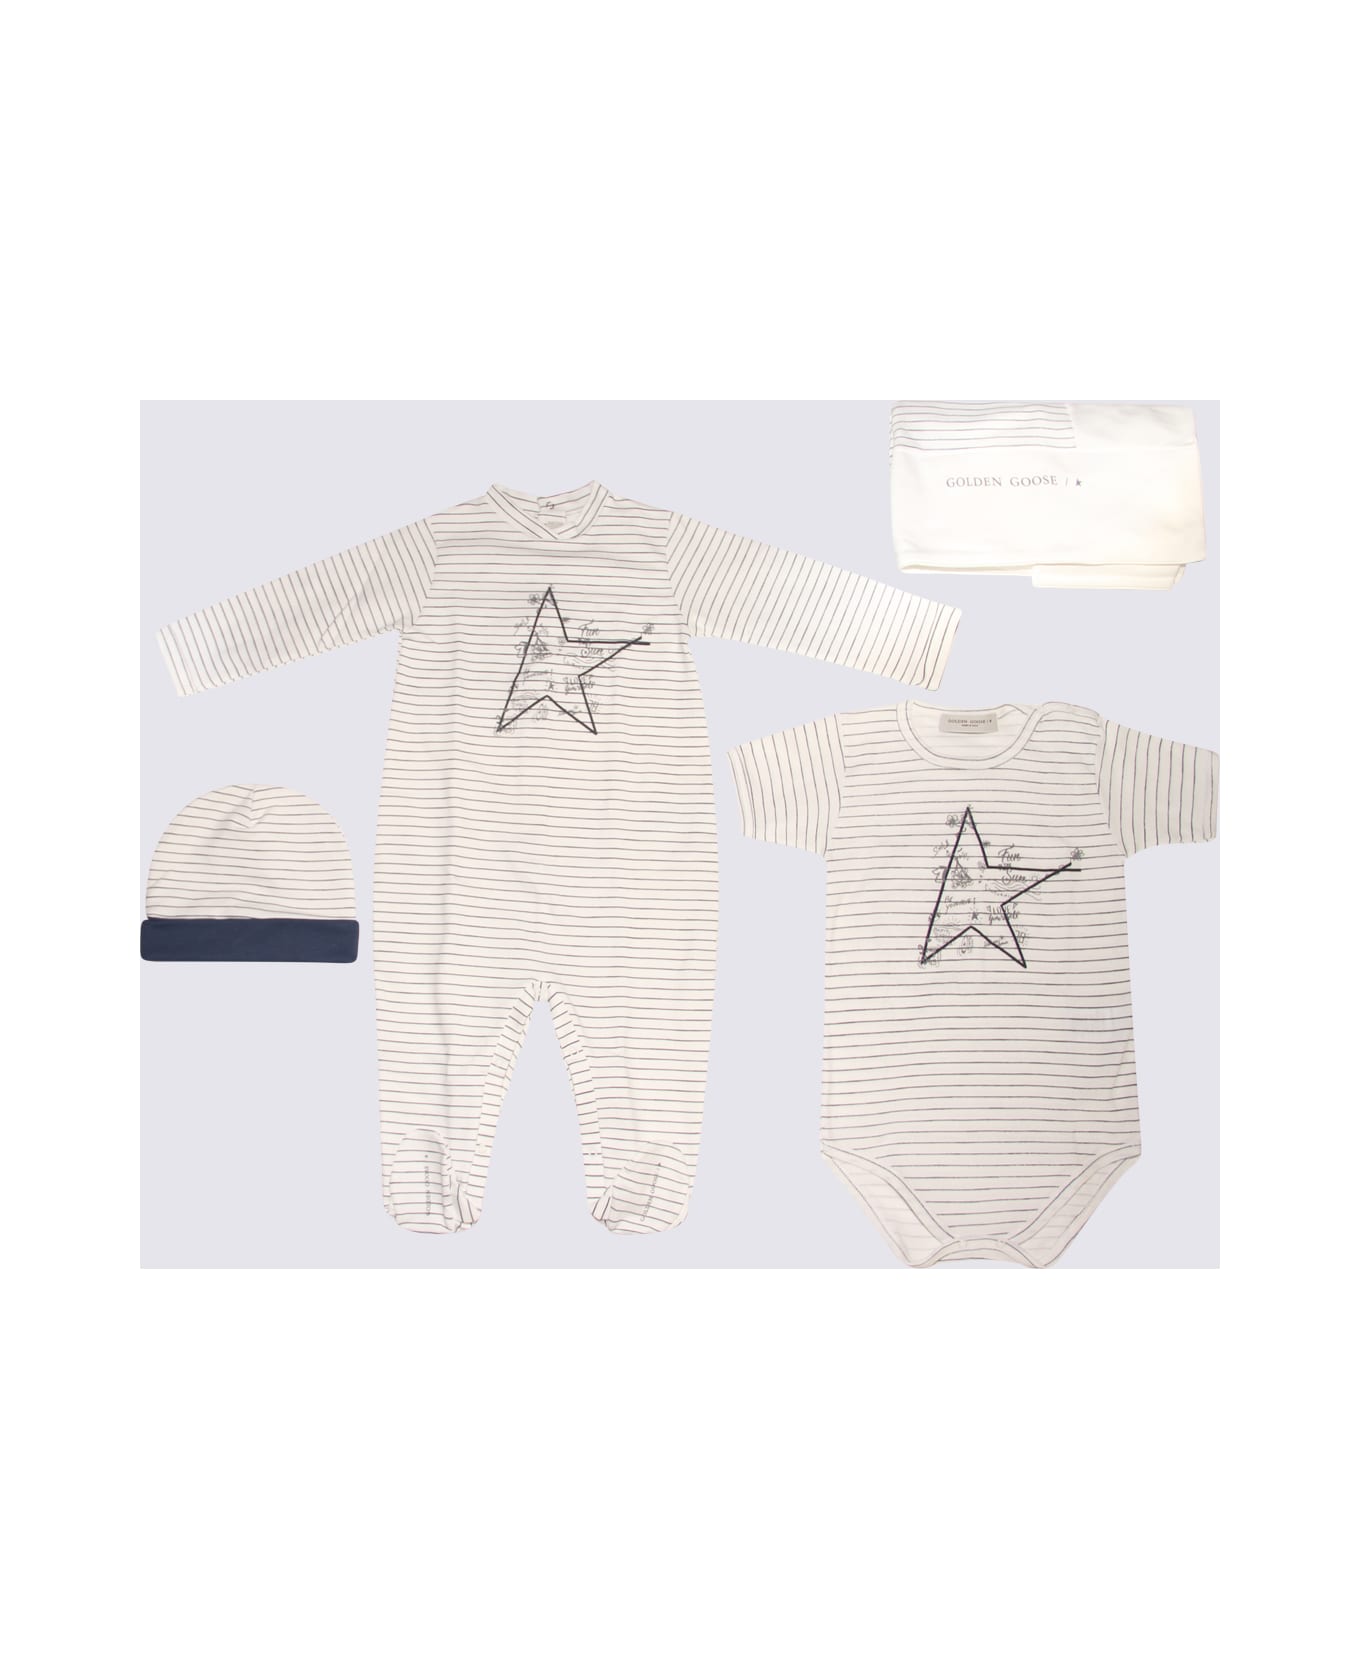 Golden Goose Blue And White Cotton 4 Pieces Nursery Set アクセサリー＆ギフト